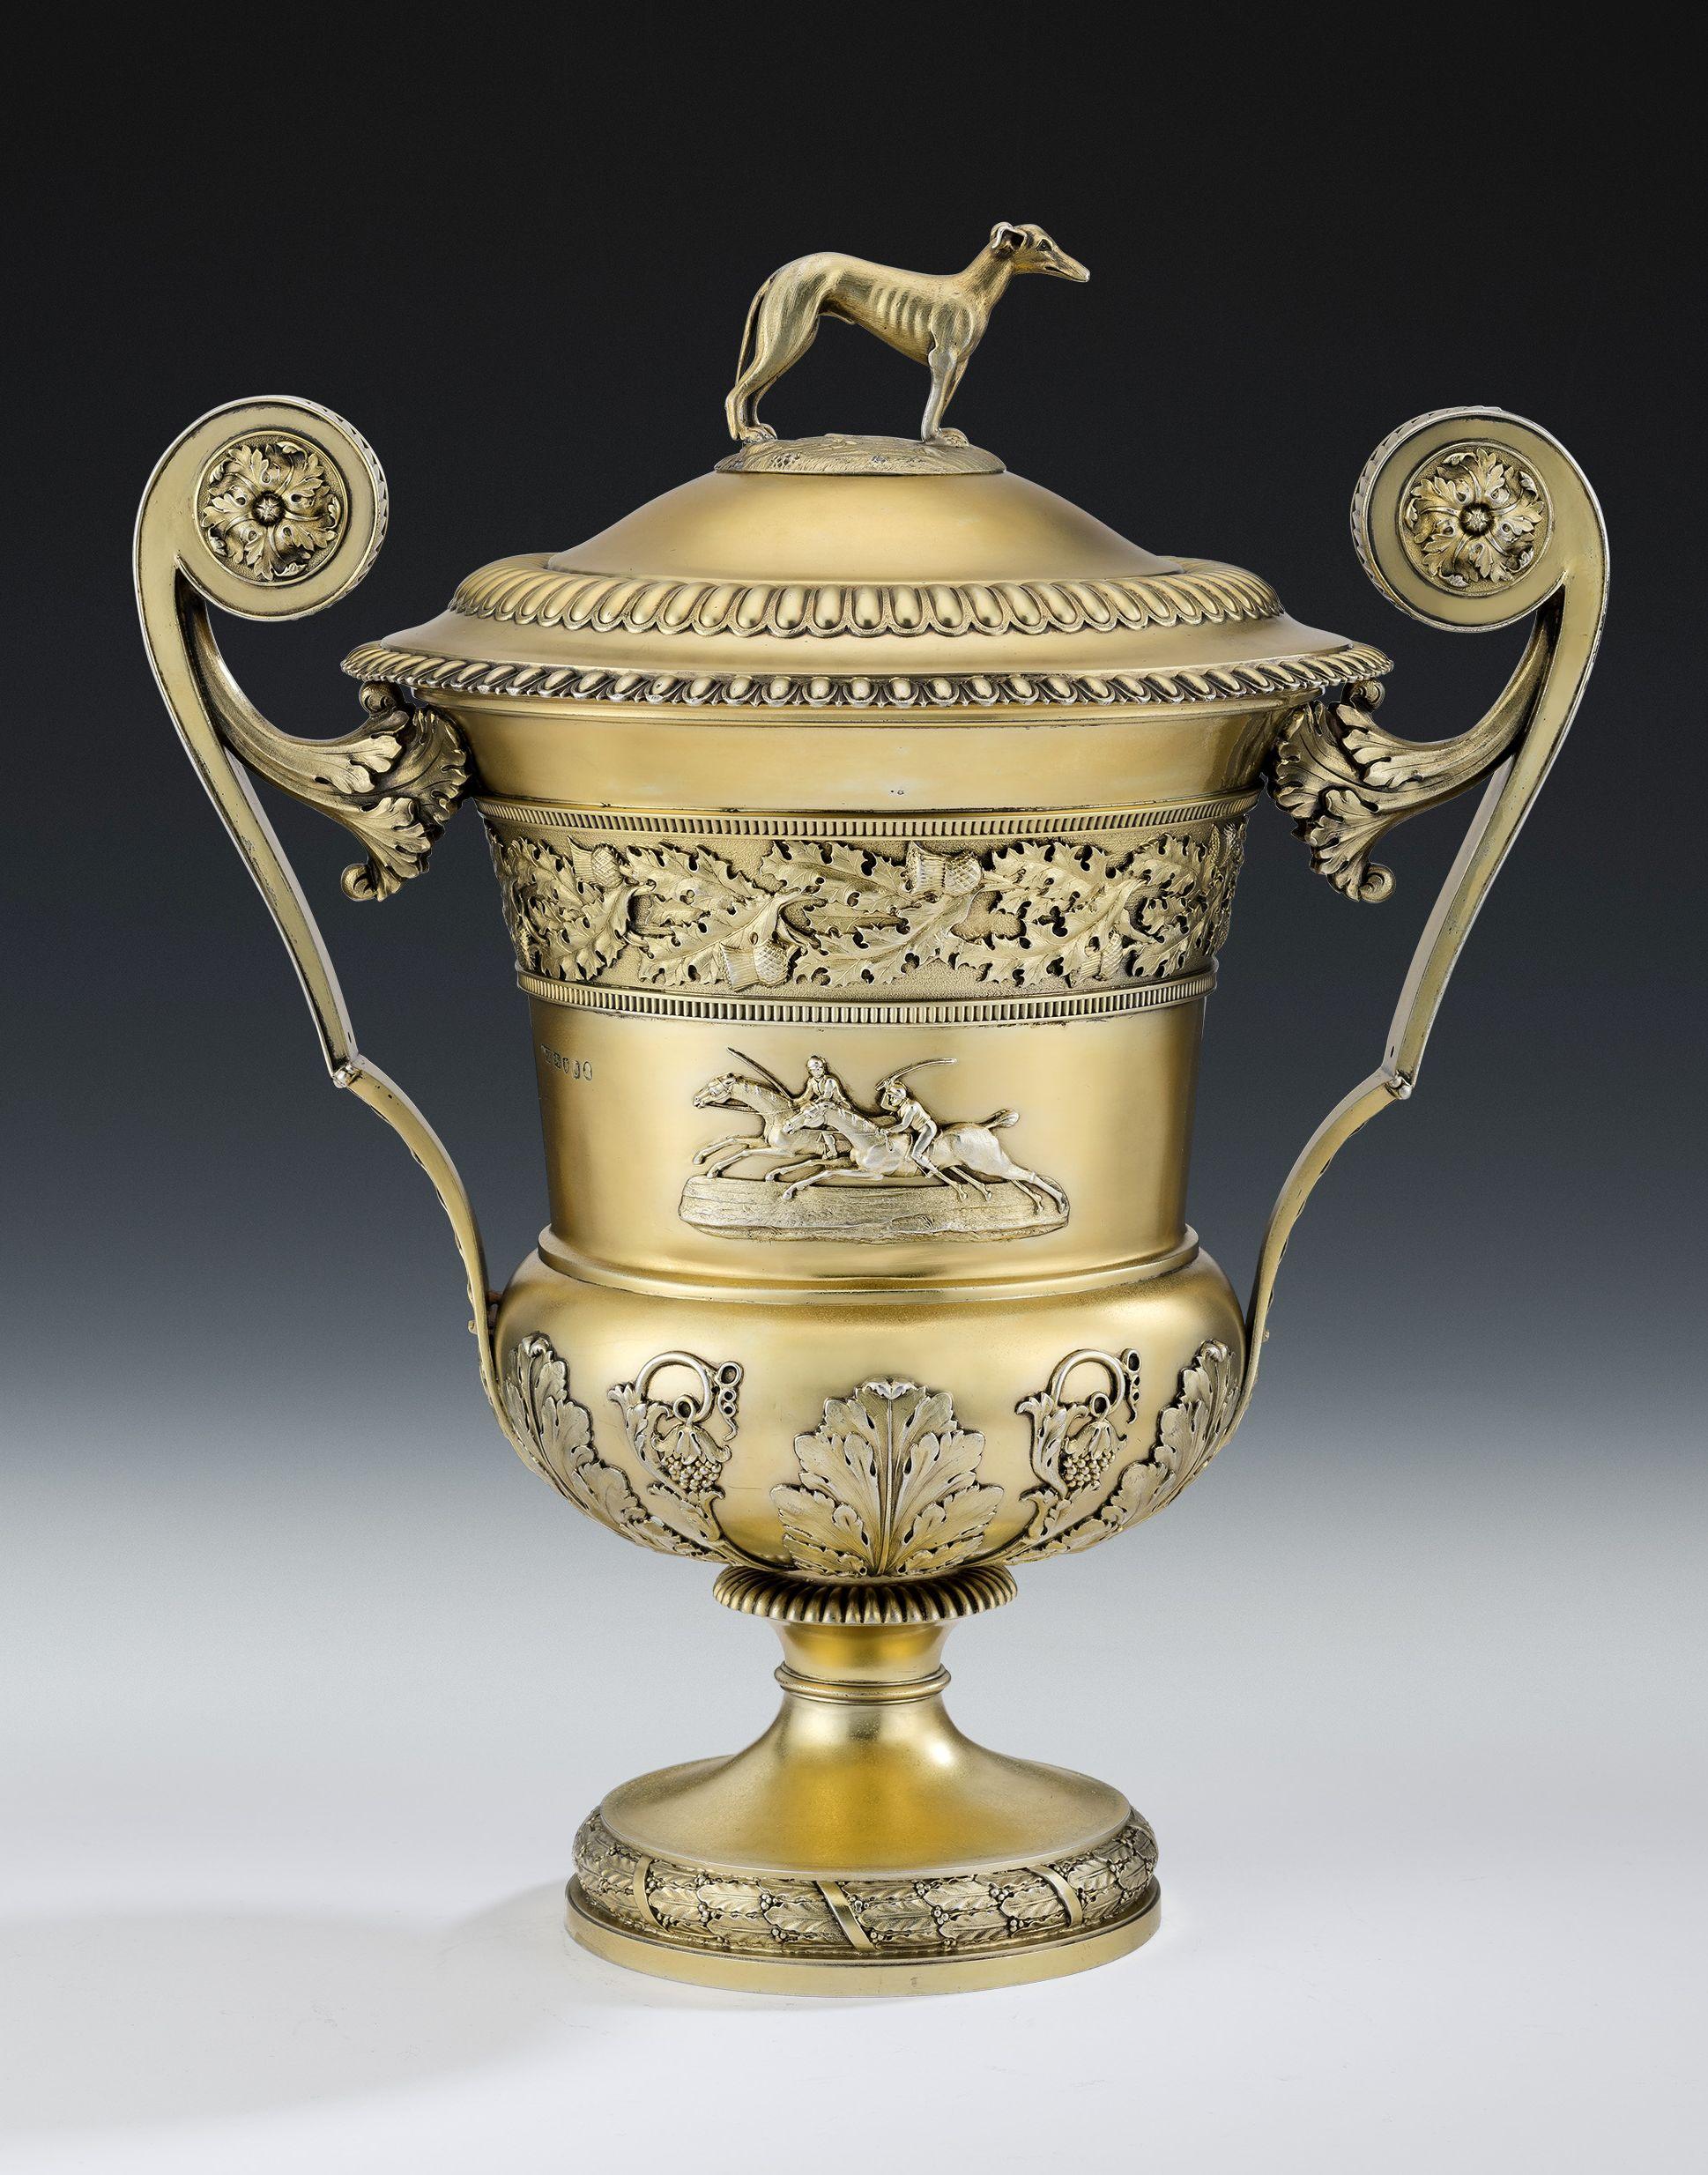 Regency George III Silver Gilt Cup & Cover Made in London in 1815 by William Elliot